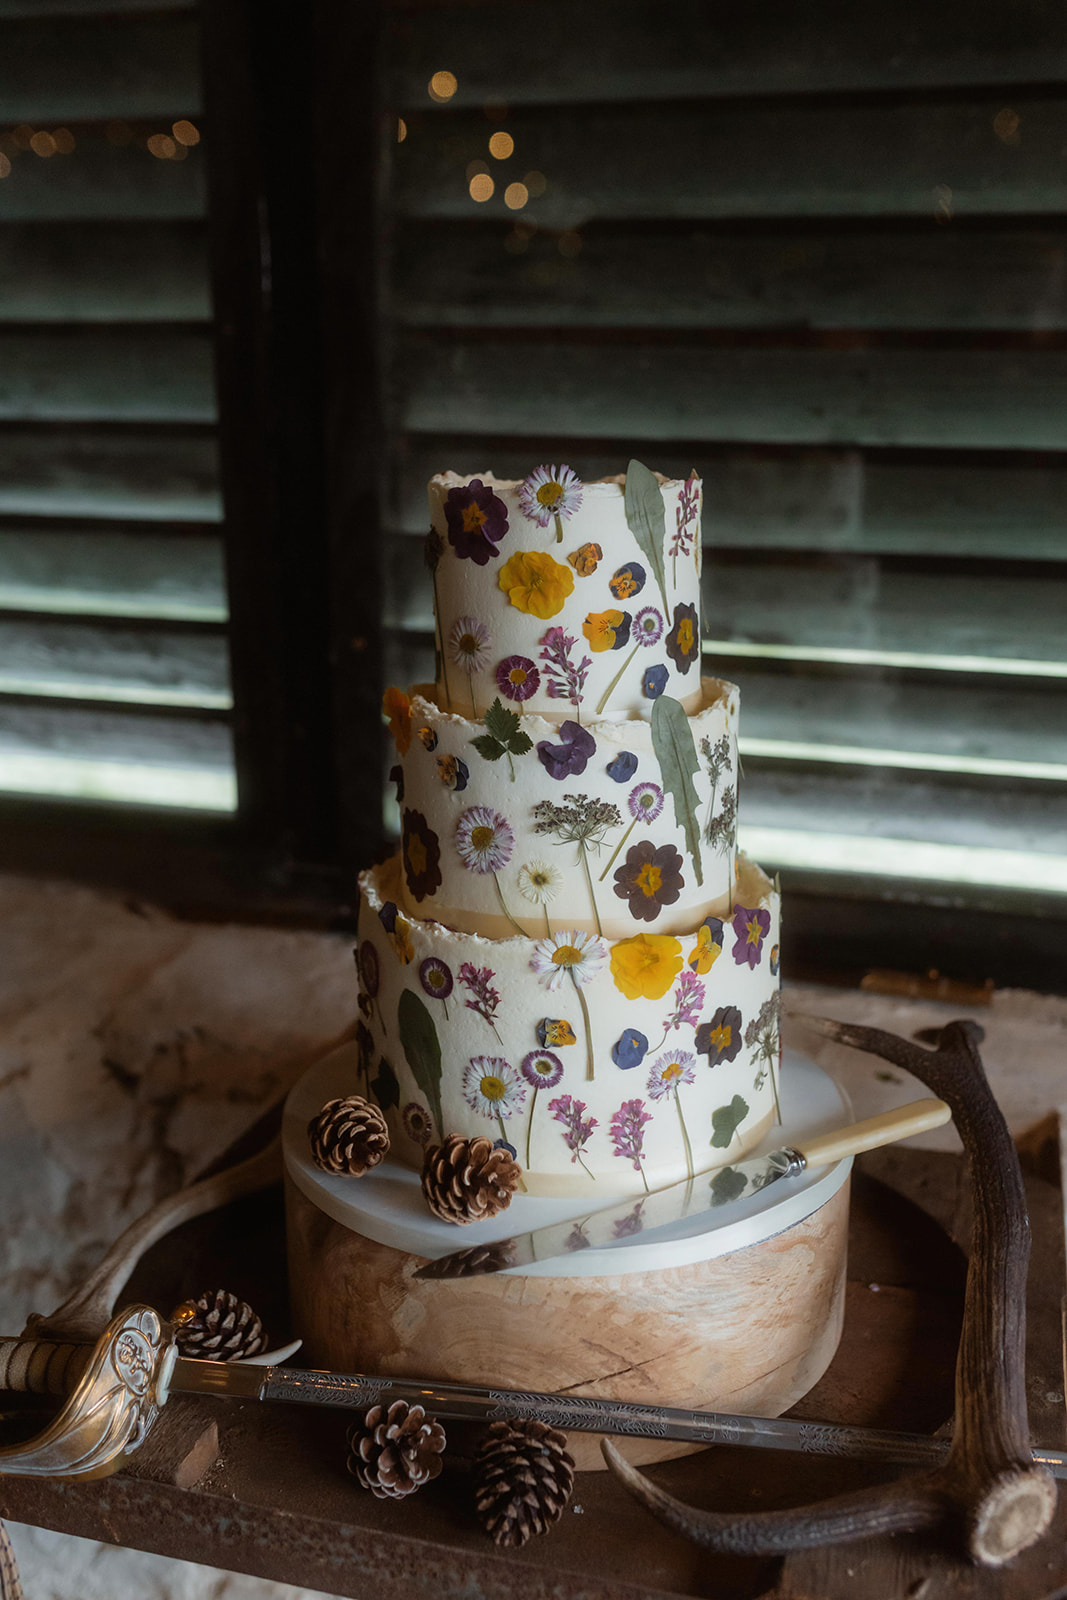 Rebecca and Simon's cake during their Isle of Skye elopement